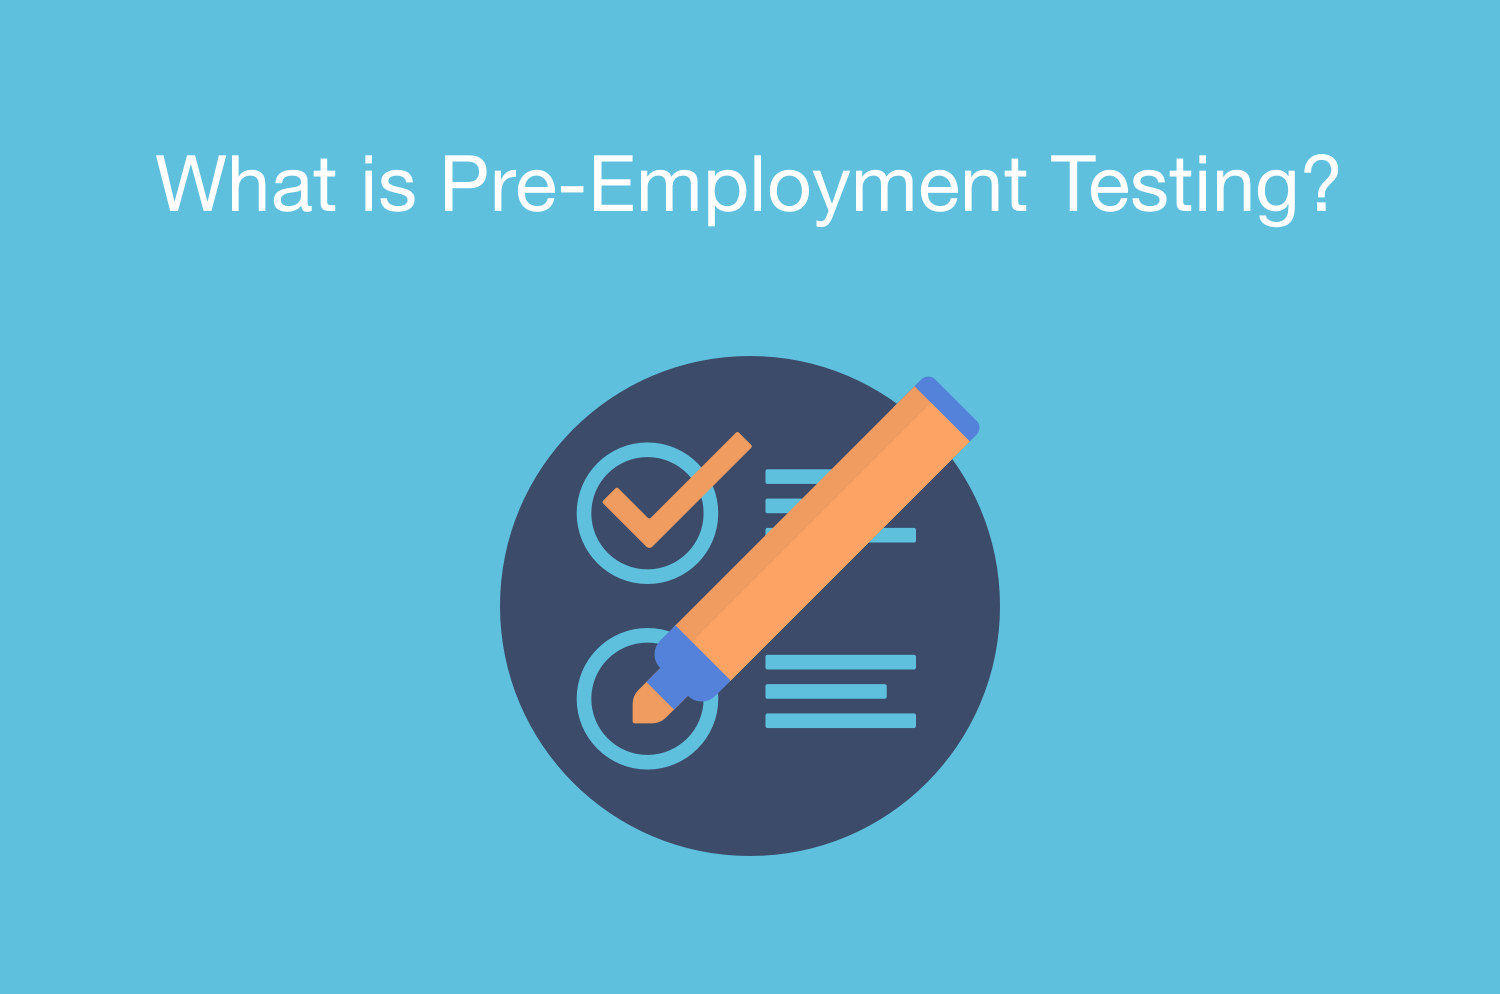 Why Do You Need Pre-Employment Testing